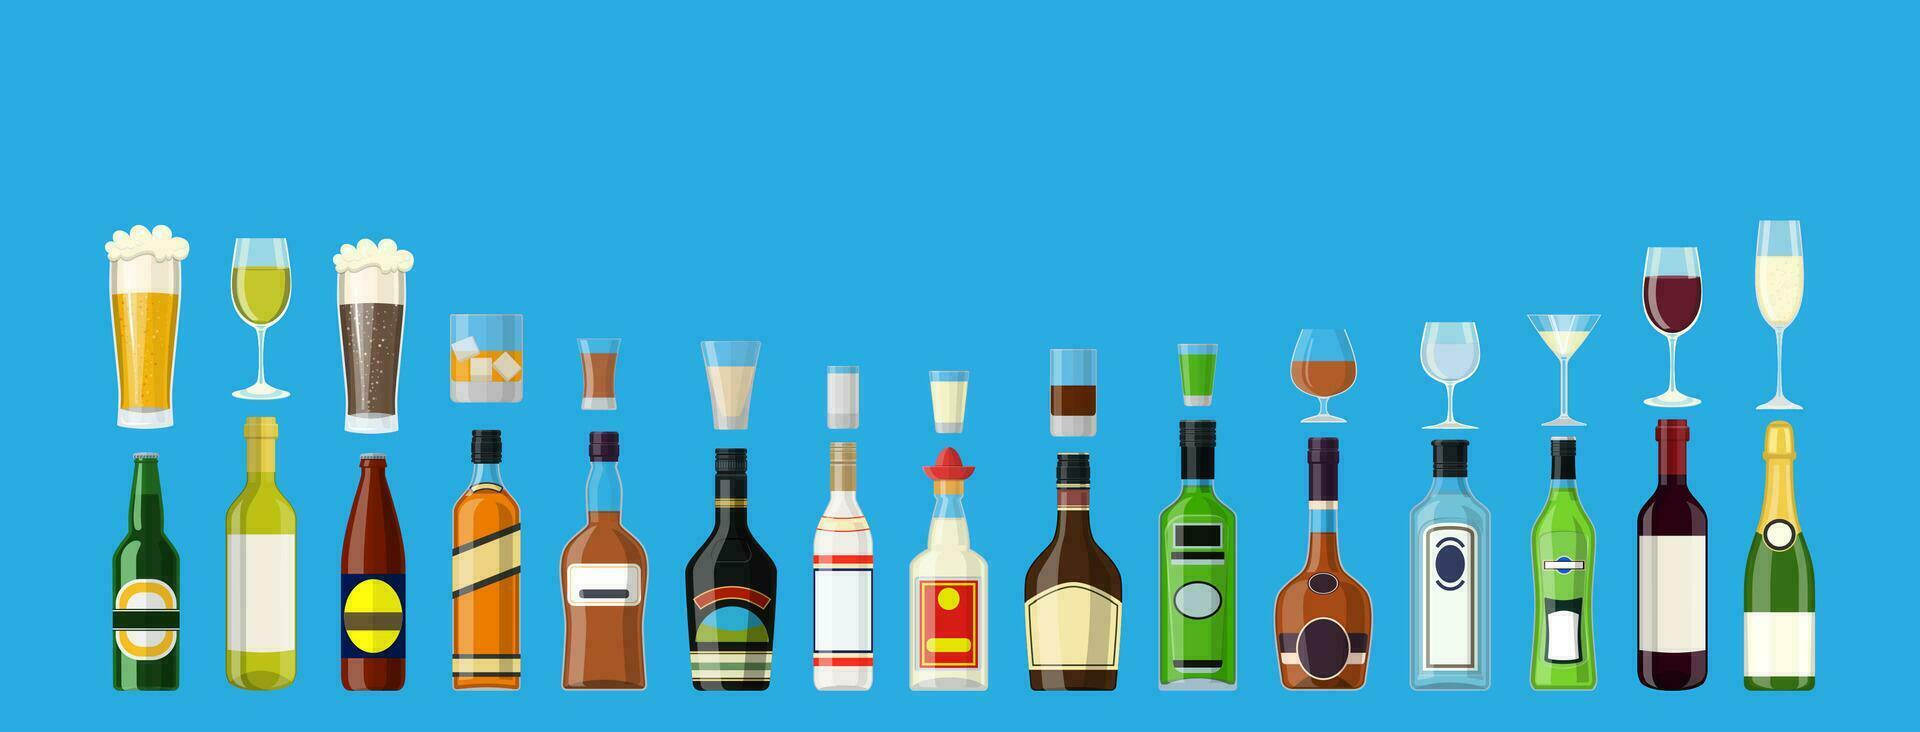 Alcohol drinks collection. Bottles with glasses. Vodka champagne wine whiskey beer brandy tequila cognac liquor vermouth gin rum absinthe bourbon. Vector illustration in flat style